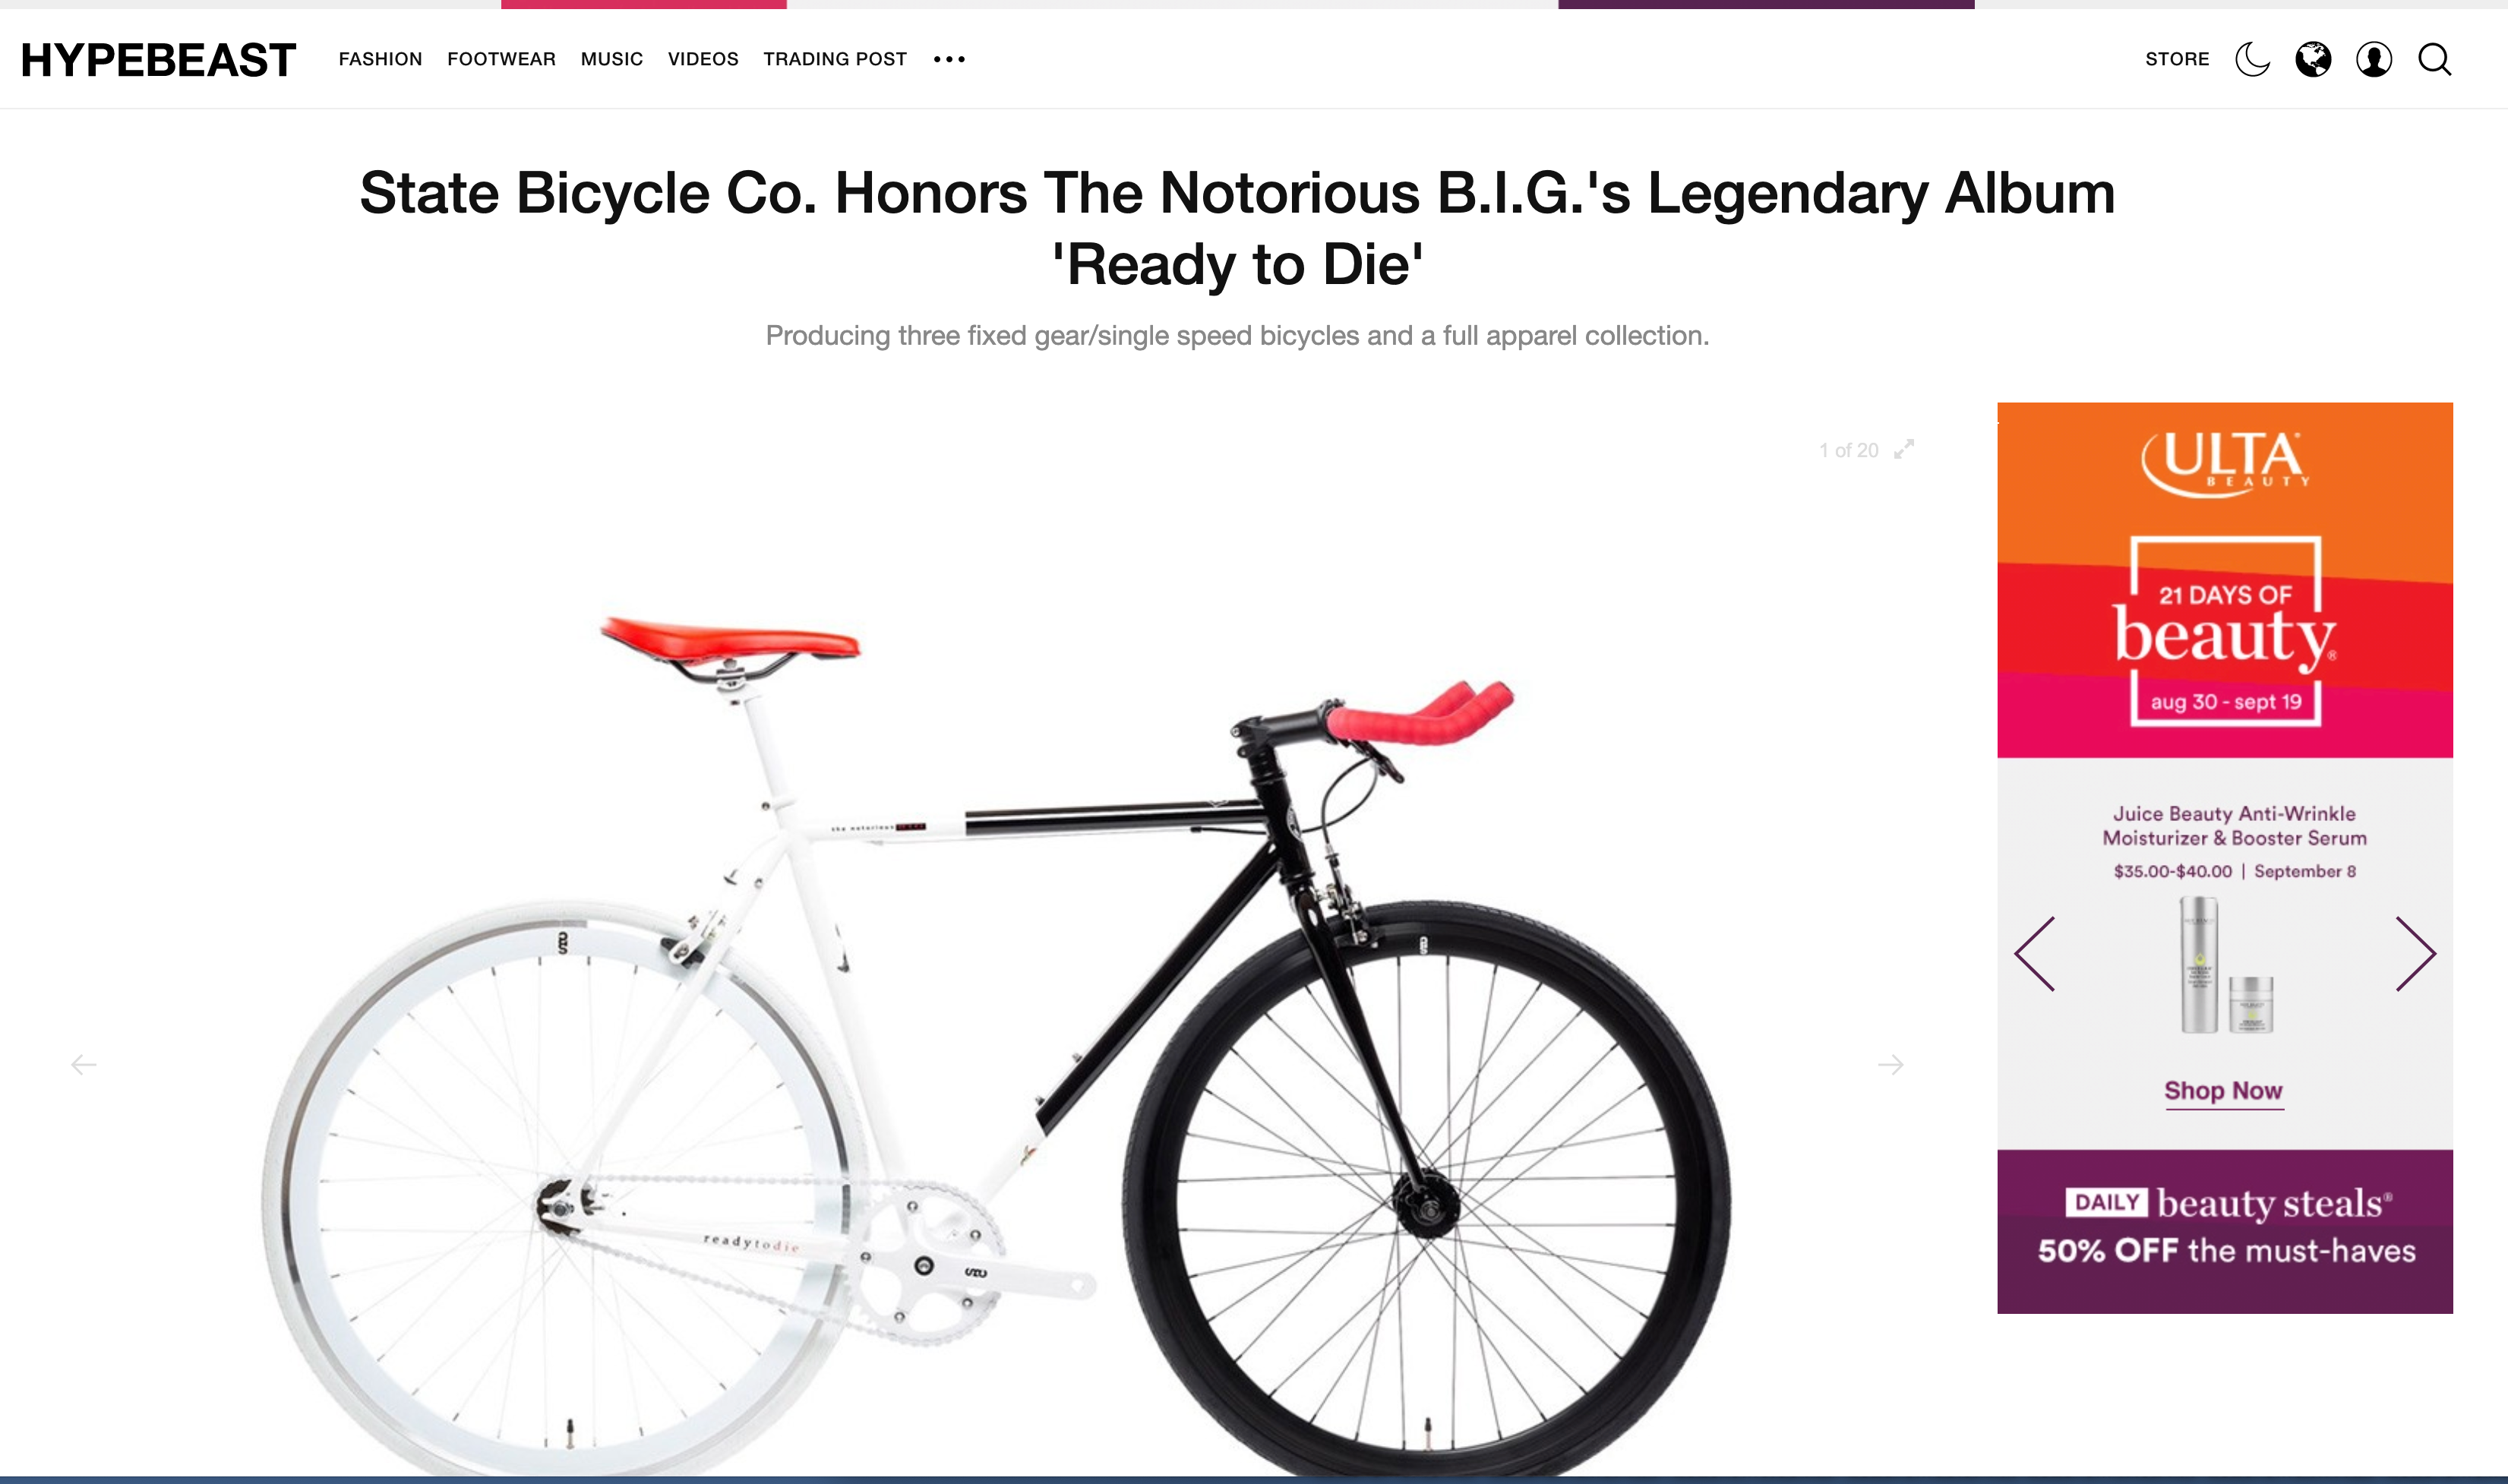 HYPEBEAST: State Bicycle Co. Honors The Notorious B.I.G.'s Legendary Album 'Ready to Die'